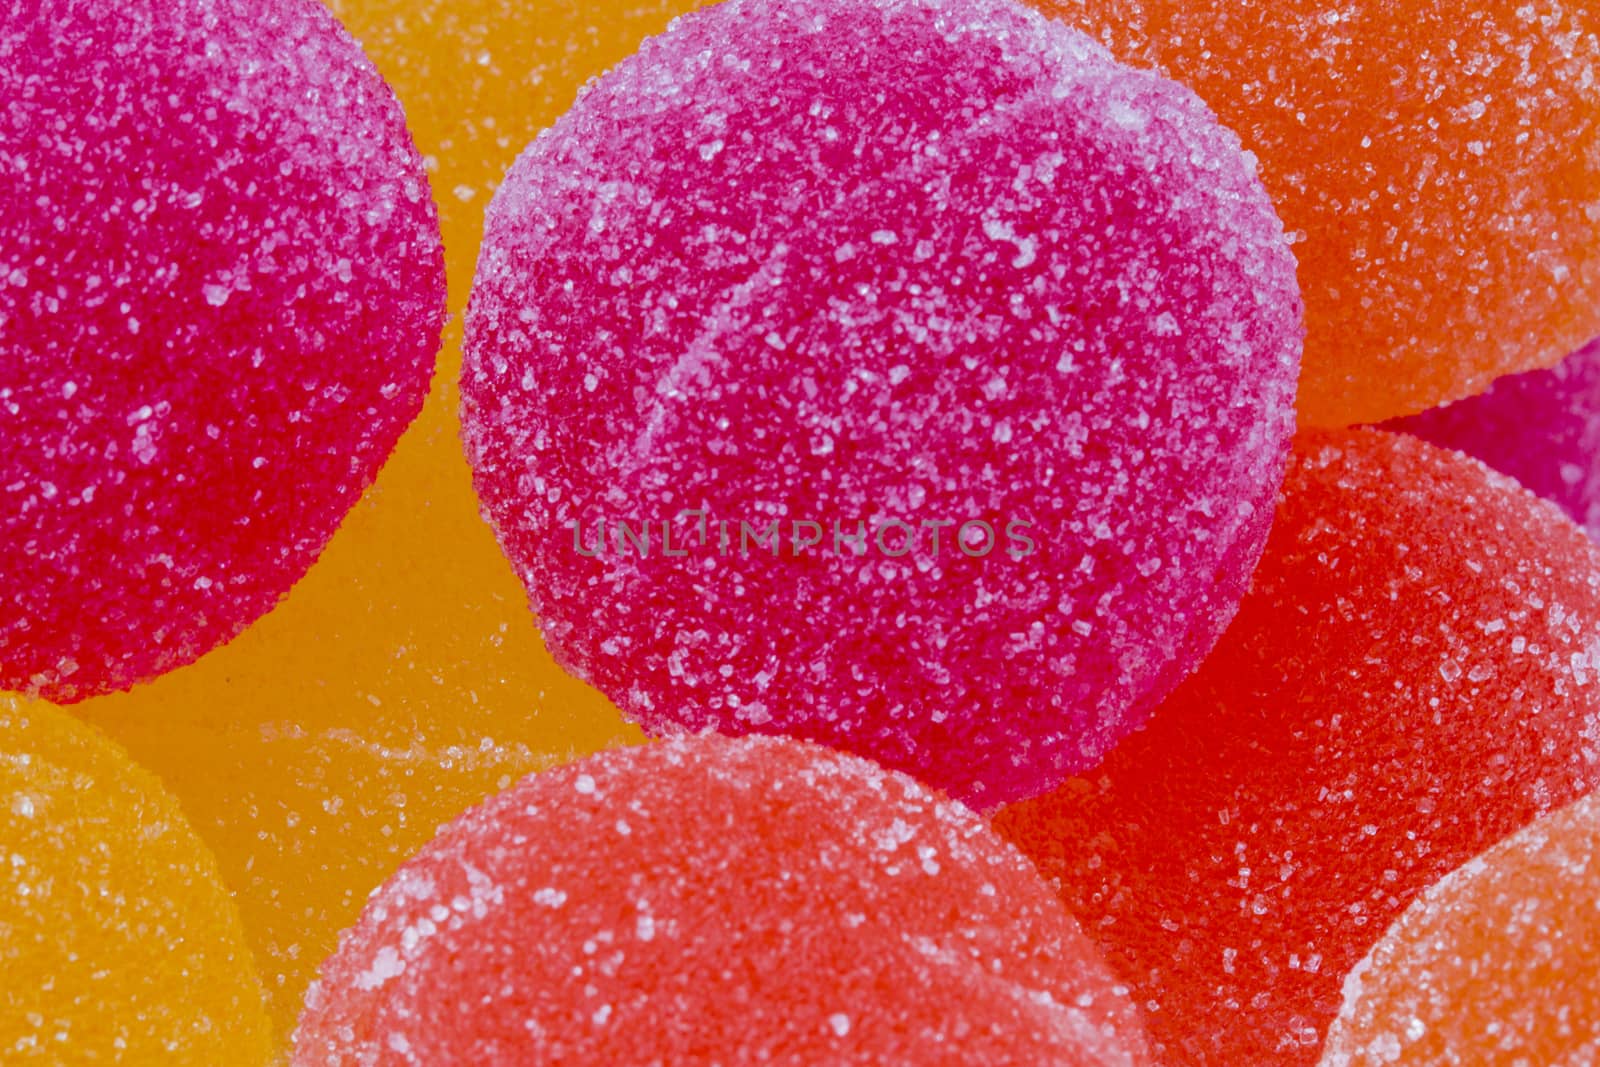 Sweet Background of Marmalade Candy Balls by gstalker